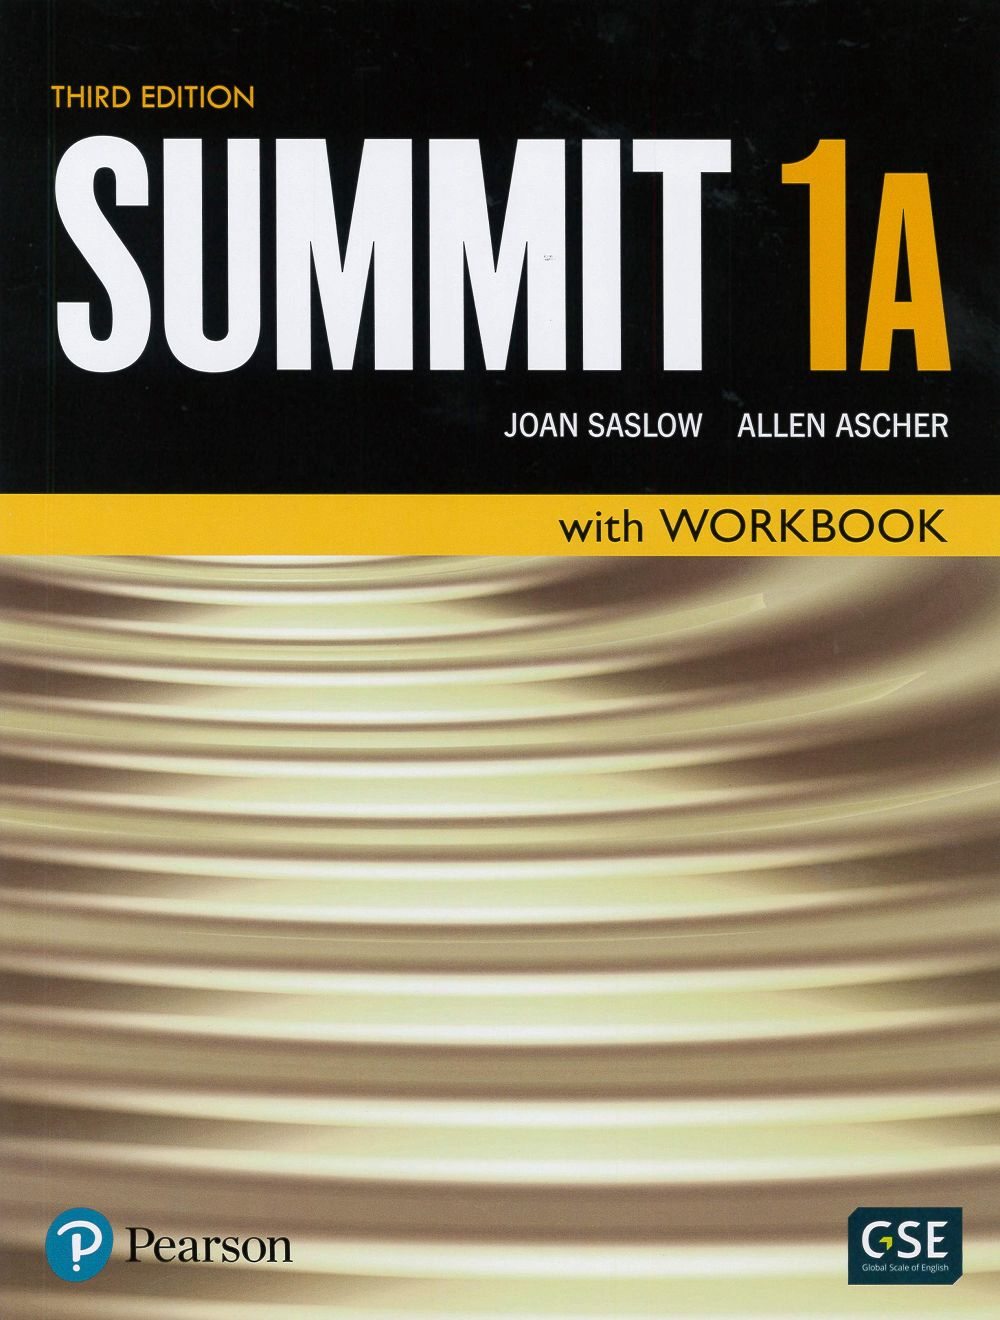 Summit 3/e (1A) Student Book with Workbook